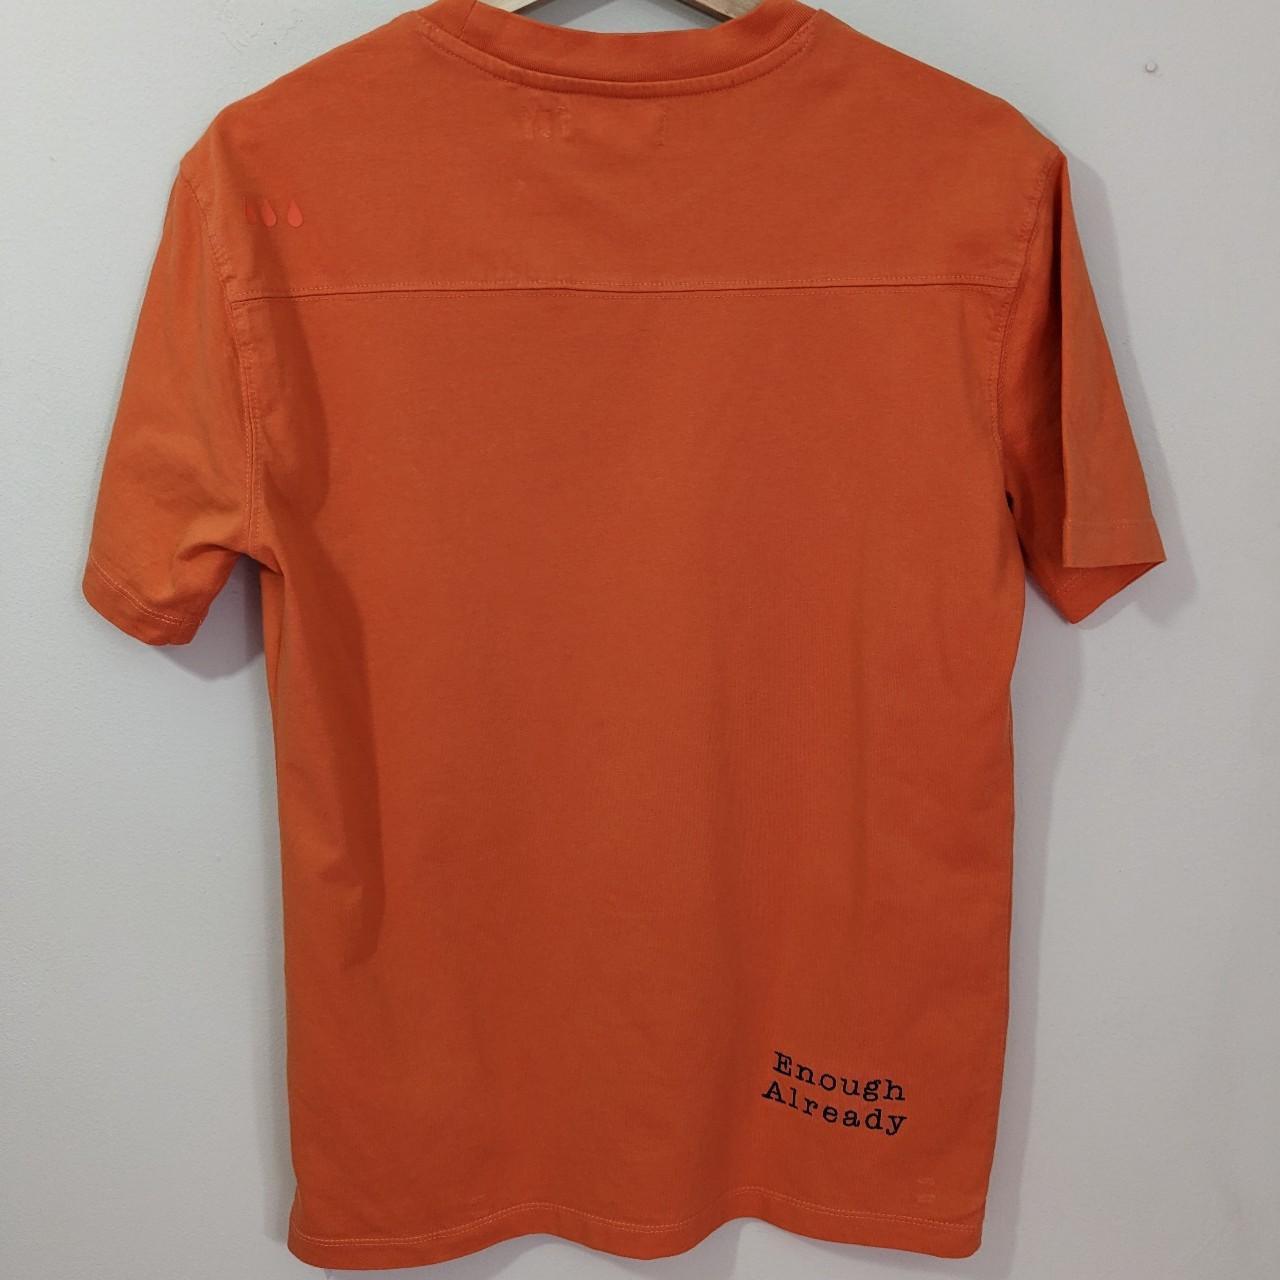 Size Small Reworked Orange T-shirt Embroidered Winnie the Pooh Design and Quote